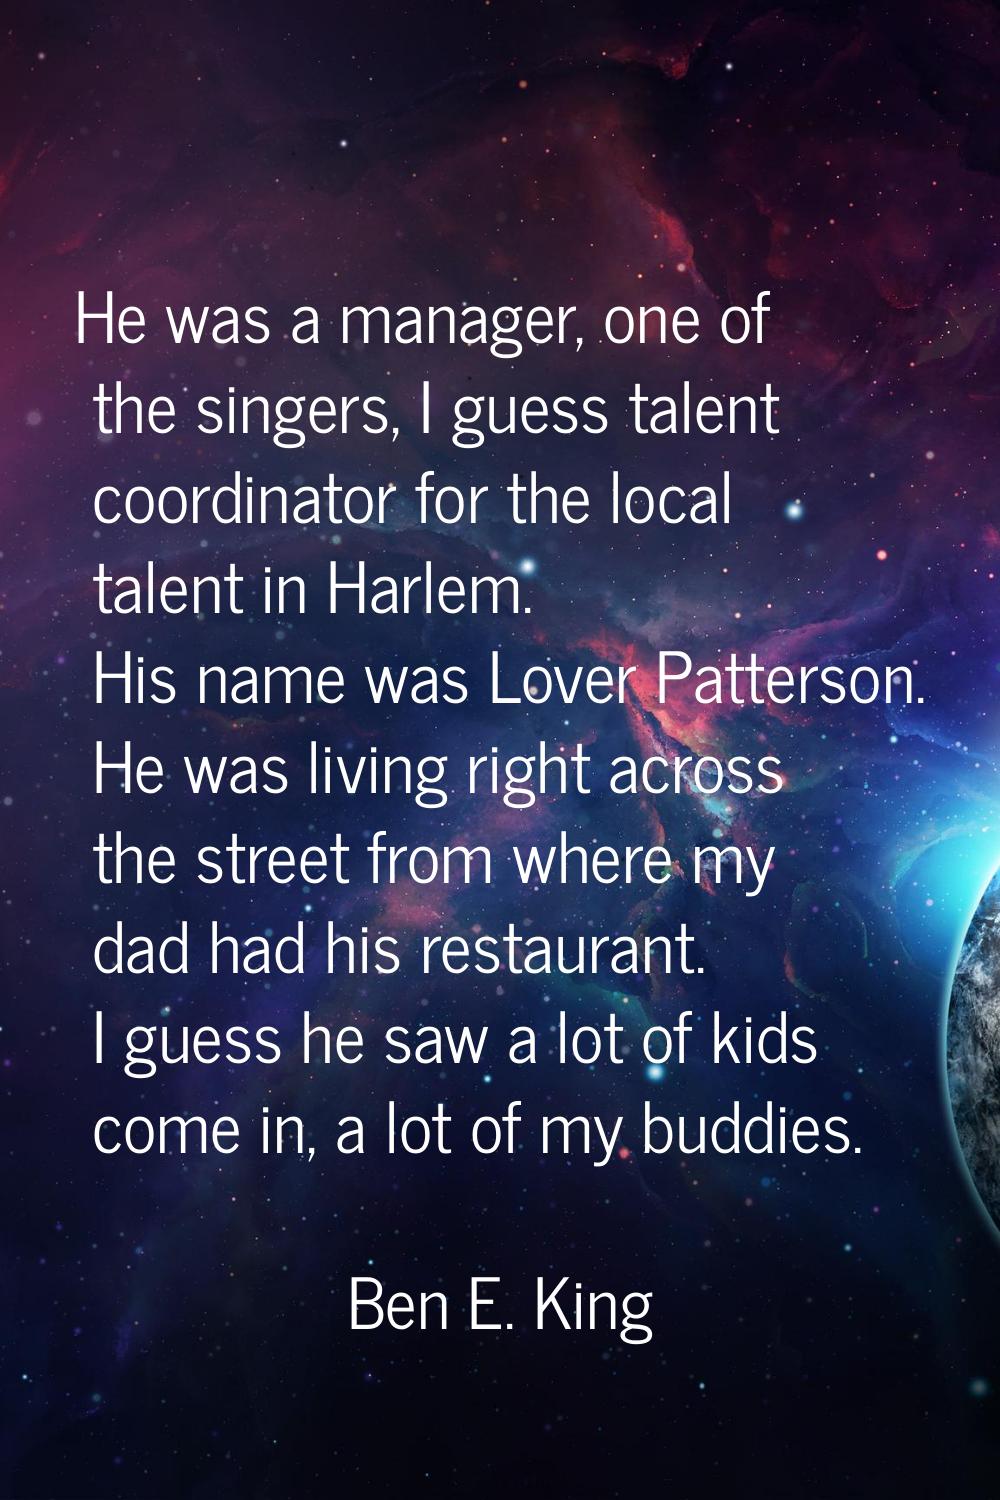 He was a manager, one of the singers, I guess talent coordinator for the local talent in Harlem. Hi